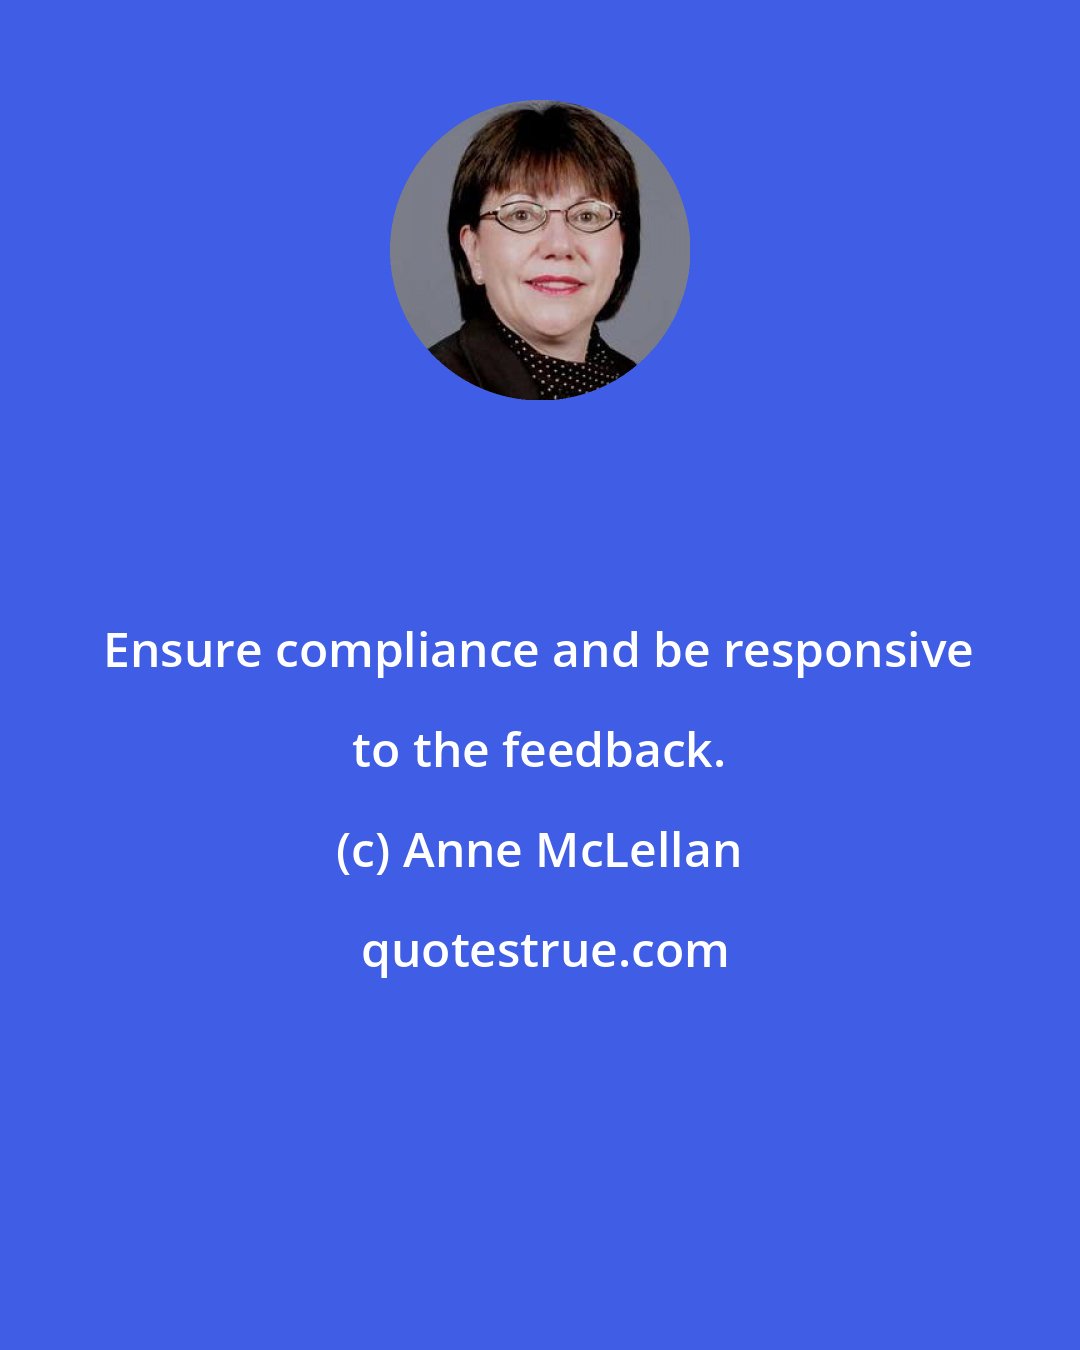 Anne McLellan: Ensure compliance and be responsive to the feedback.